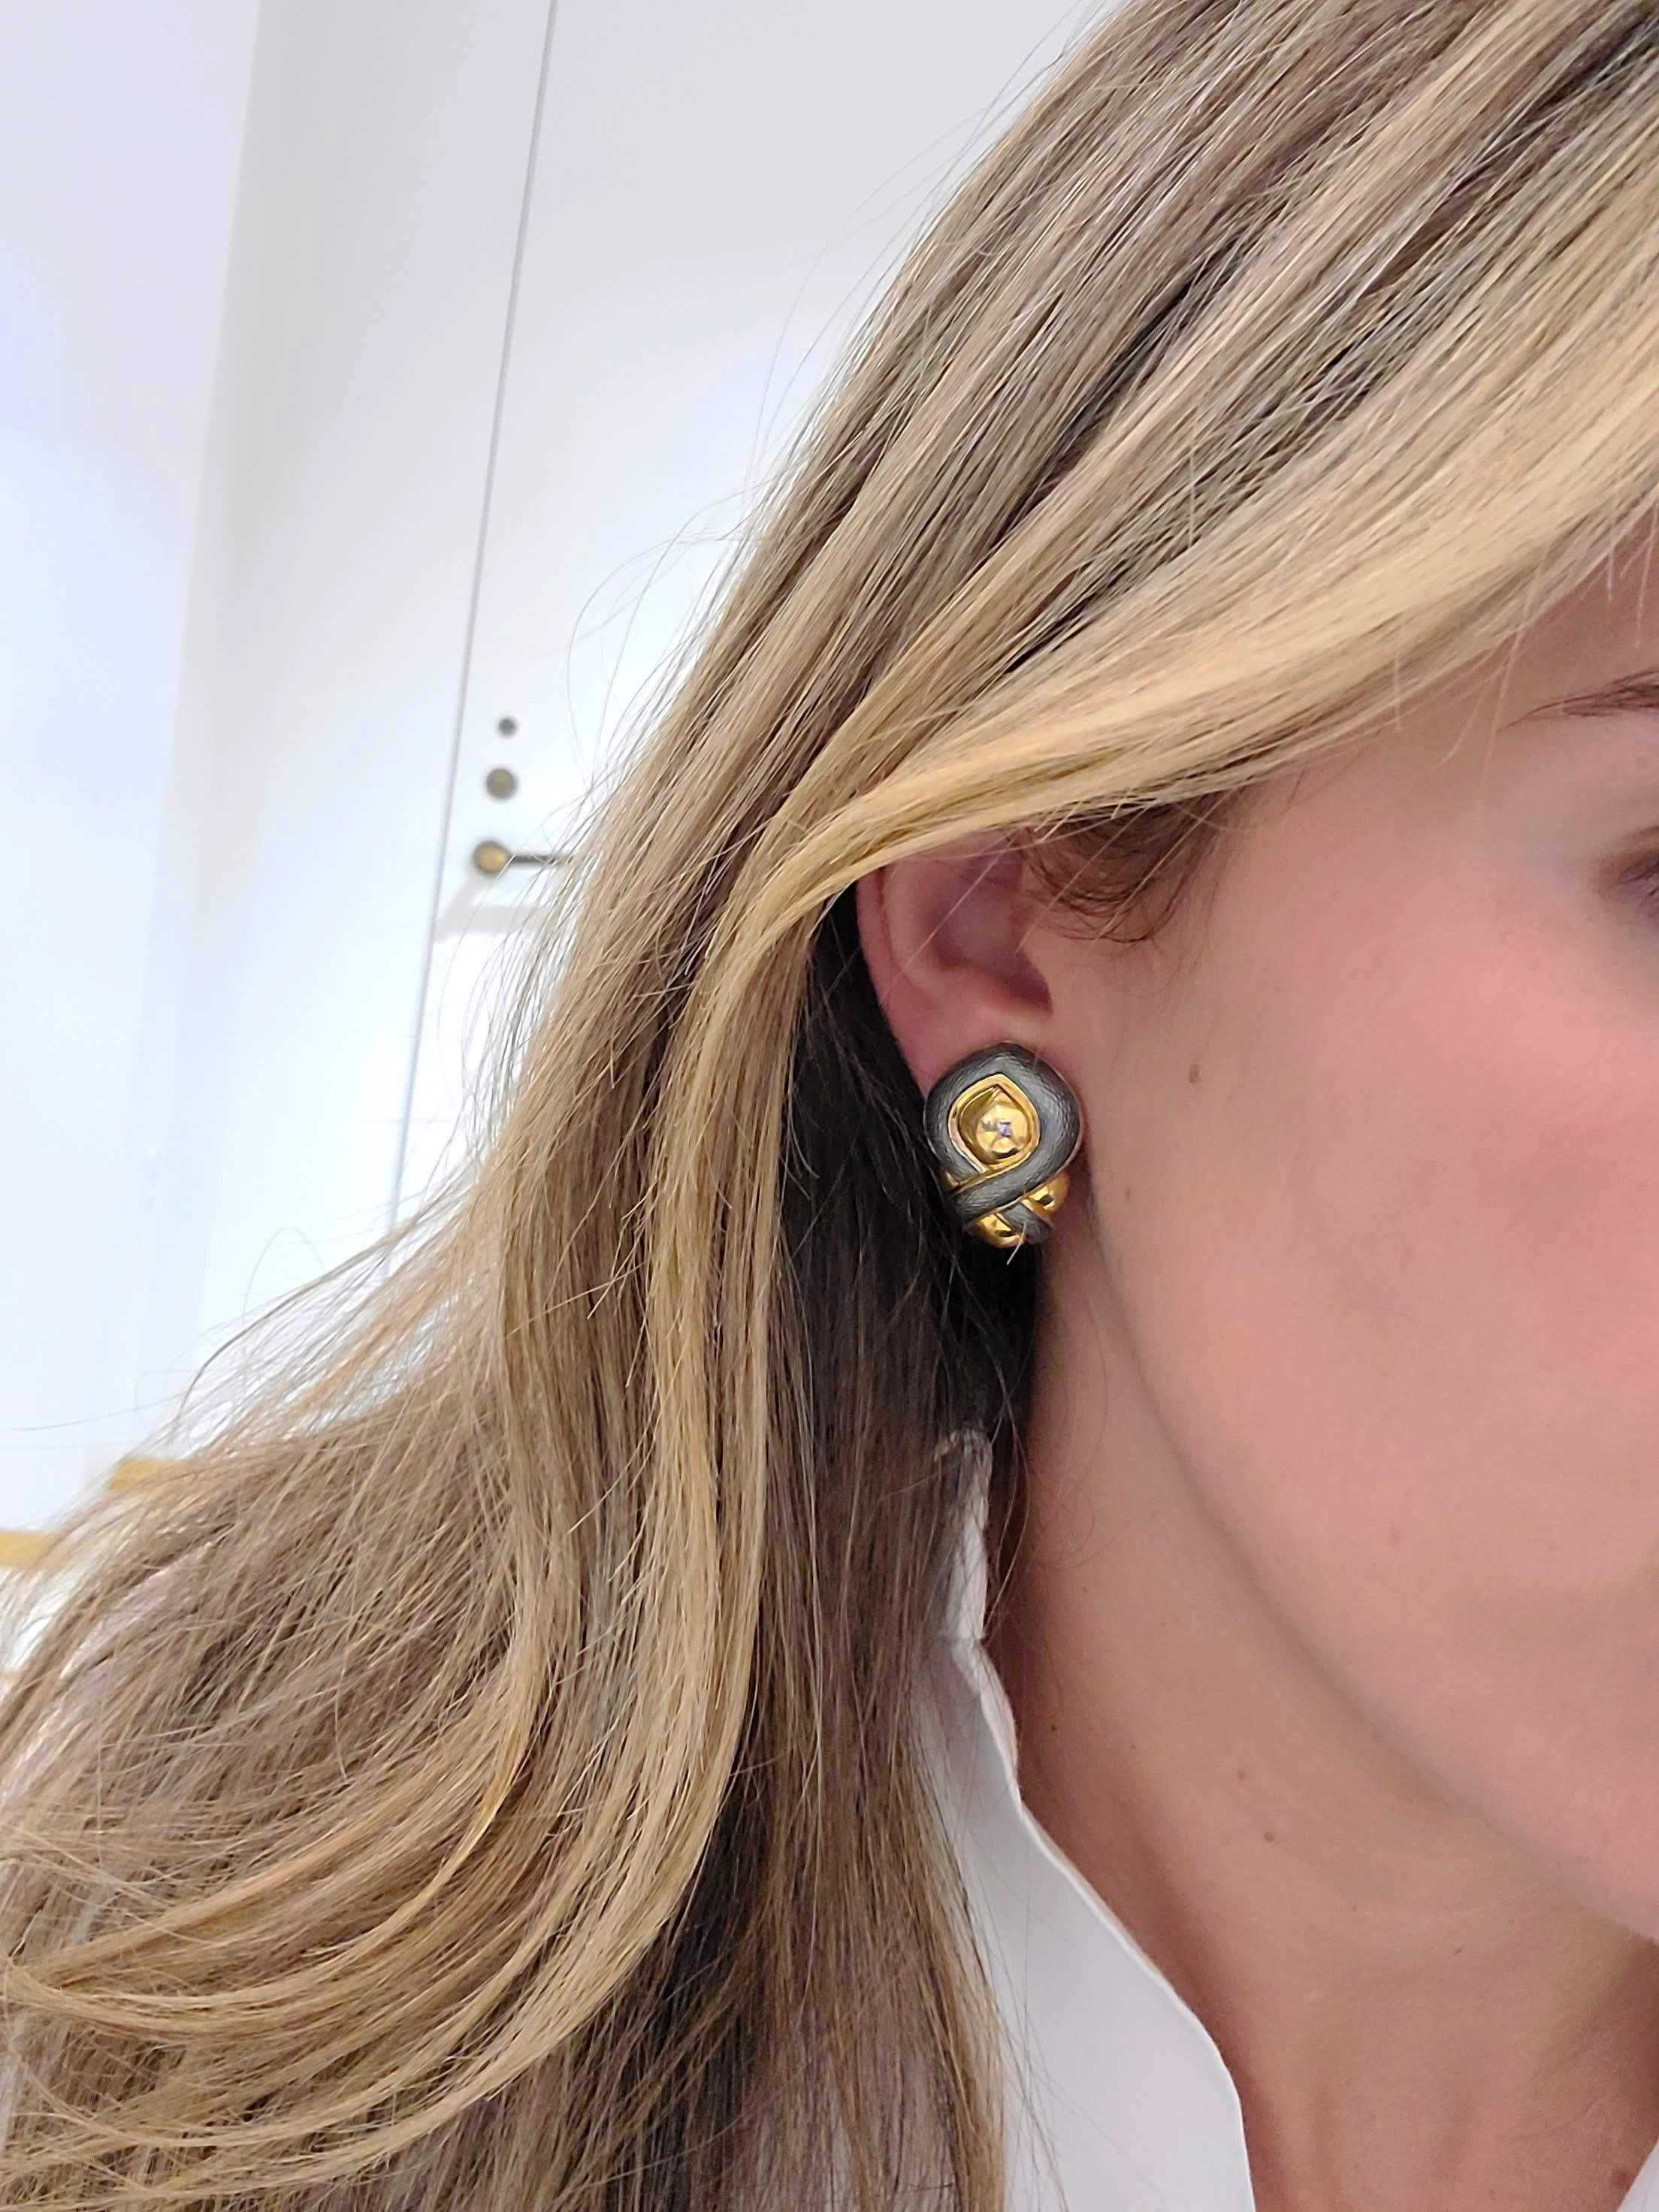 Started in 1967 by Leo and Ginnie de Vroomen the company is known for bold and innovative designs, along with exquisite enamel work.  Distinctive from the start, the renowned company is simply known as de Vroomen.
These 18 karat yellow gold earrings